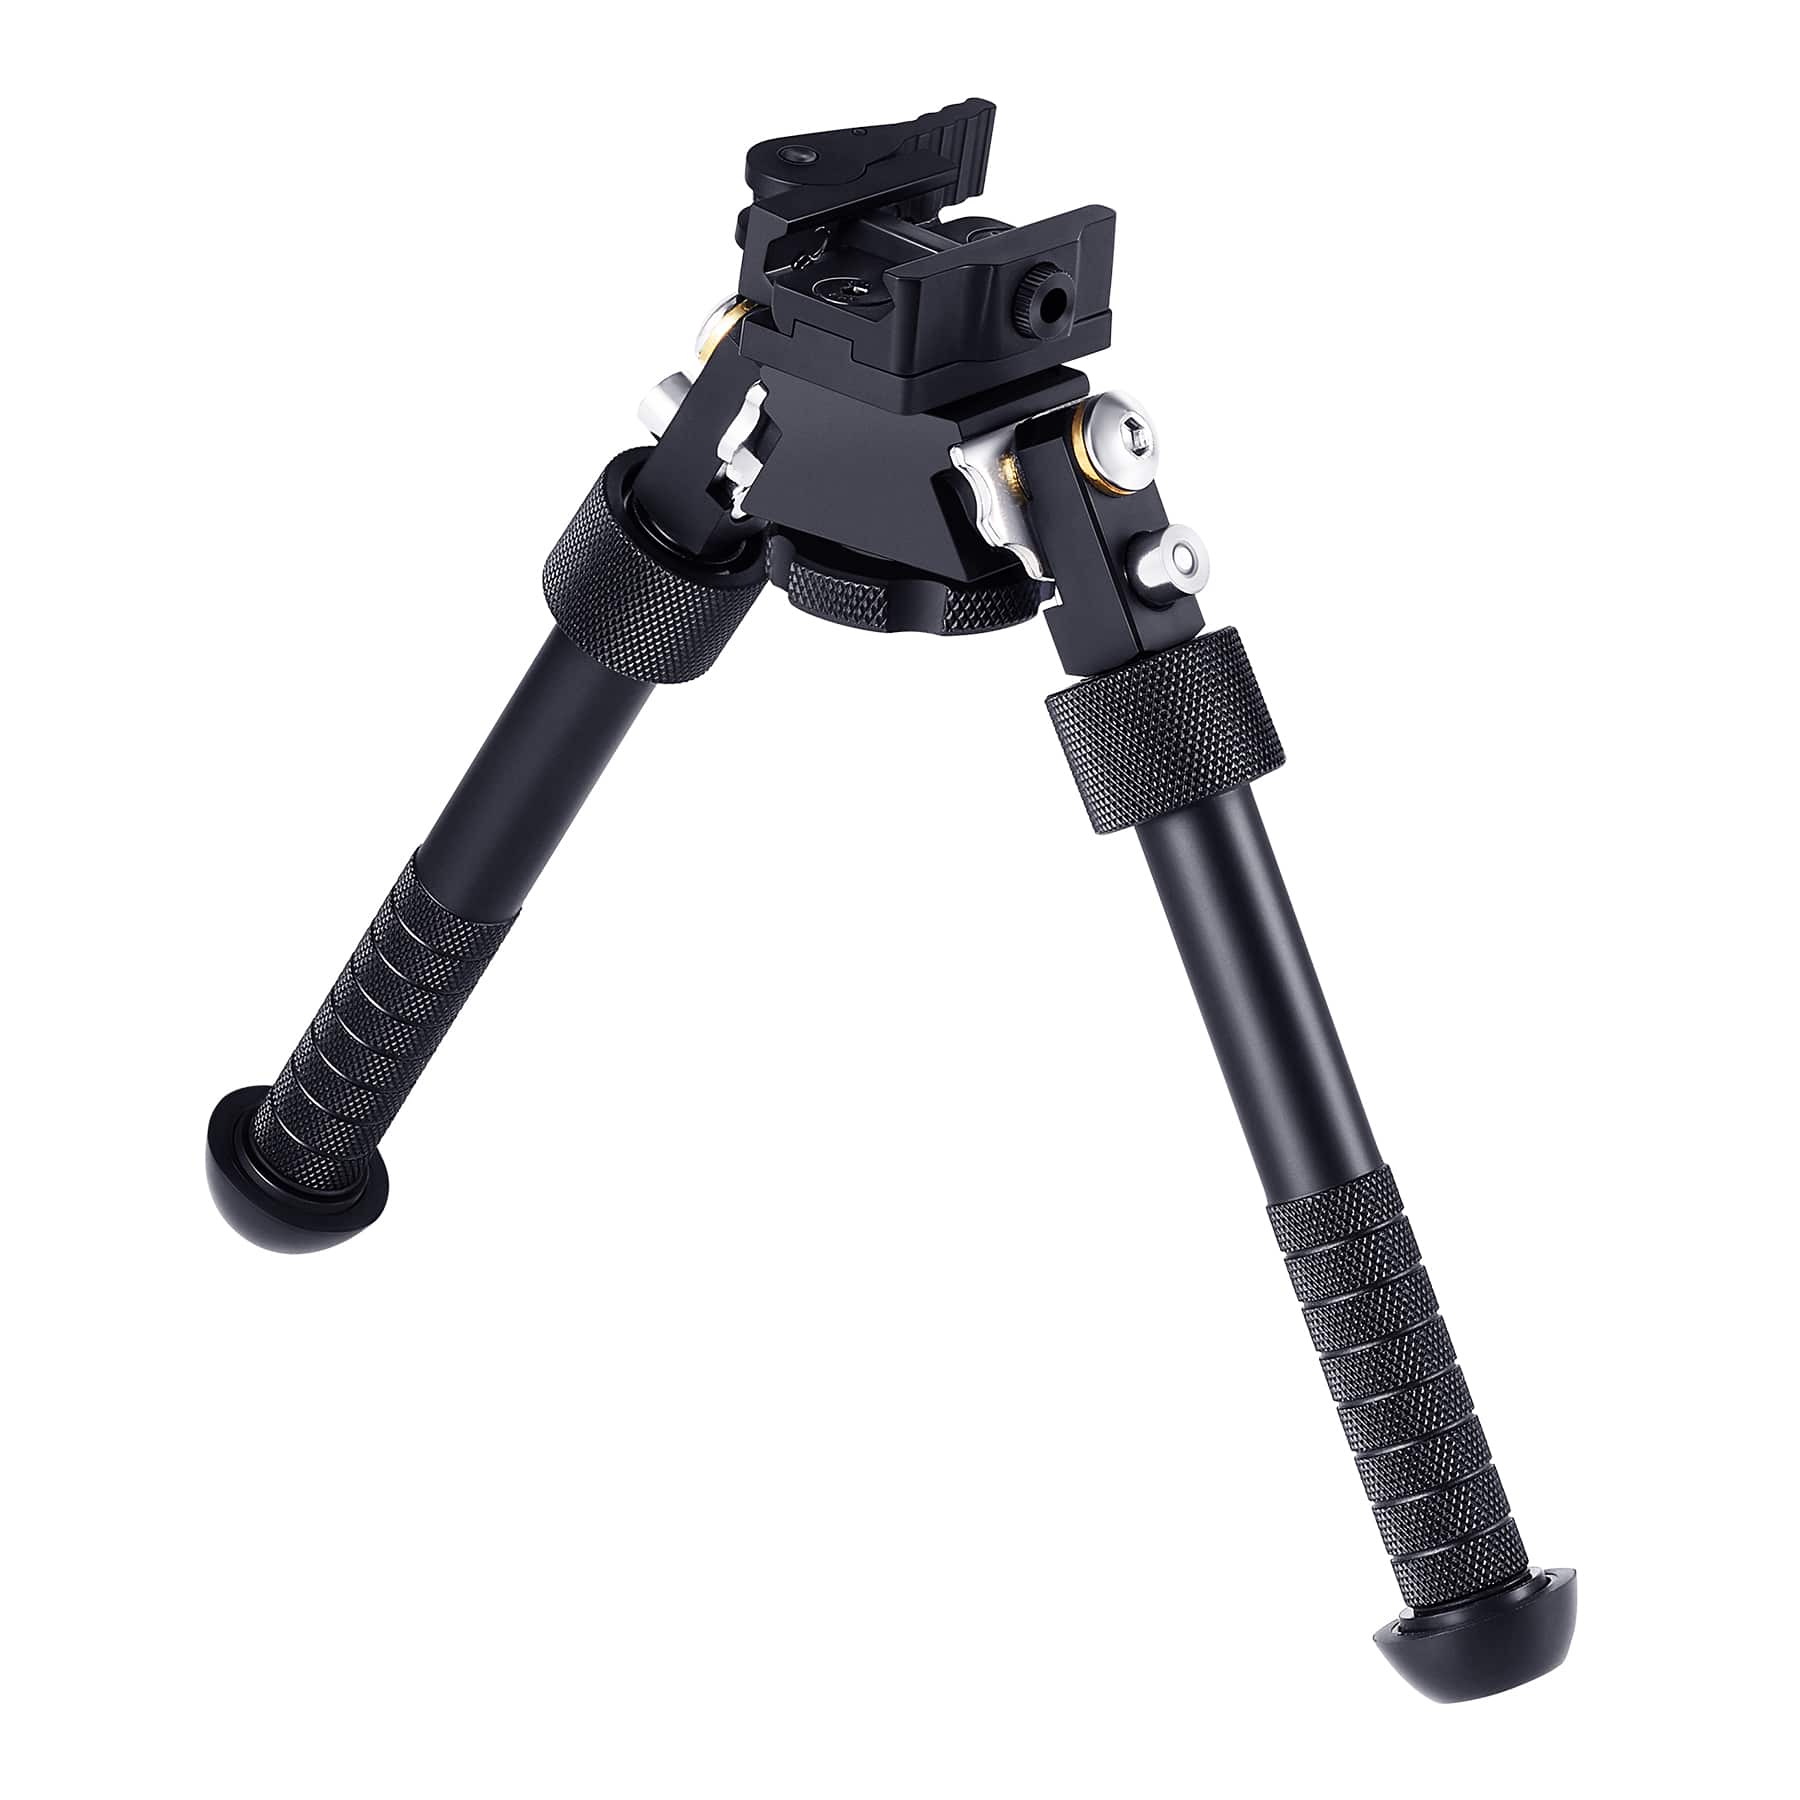 bb-gun--paintball-gun--pellet-gun--swiss-army-knife--airsoft-rifle--airsoft-rifles--airsoft-sniper--tactical-gloves--splat-r-ball-gunPINTY Rifle Bipod with 5 Leg Positions 6.5 to 9.5 Inch Adjustable Legs and 20 to 22 mm Picatinny Compatibility, Tactical Accessory with 360 Degree Swivel Aluminum Structure & Matte Black Oxide Coating